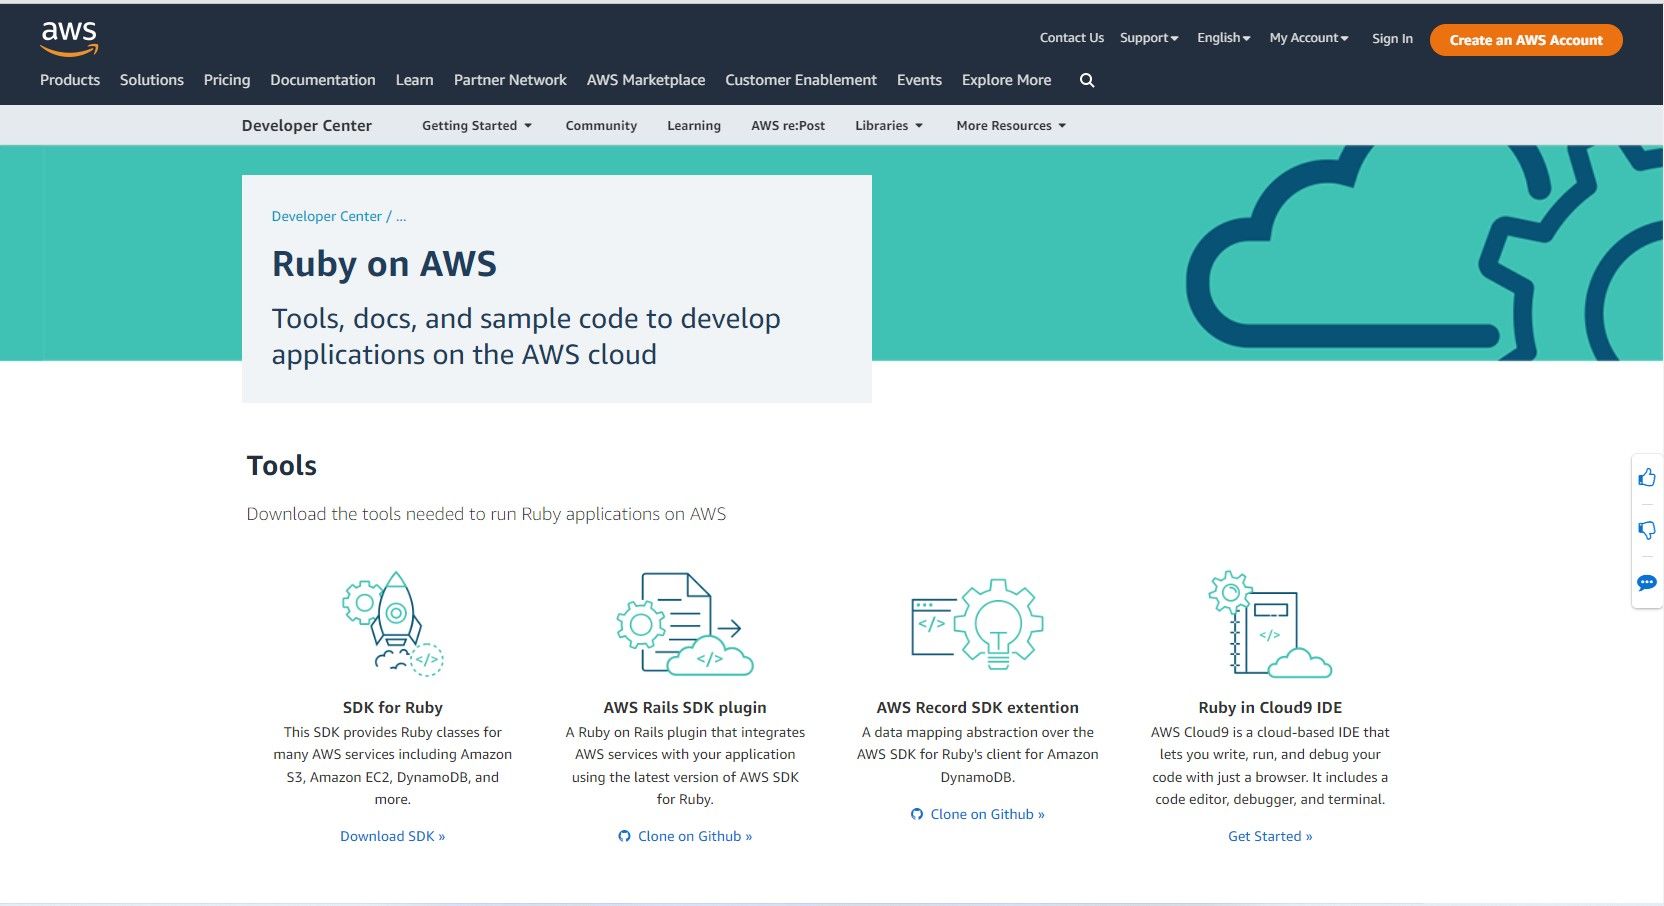 Website interface for Ruby on AWS platform